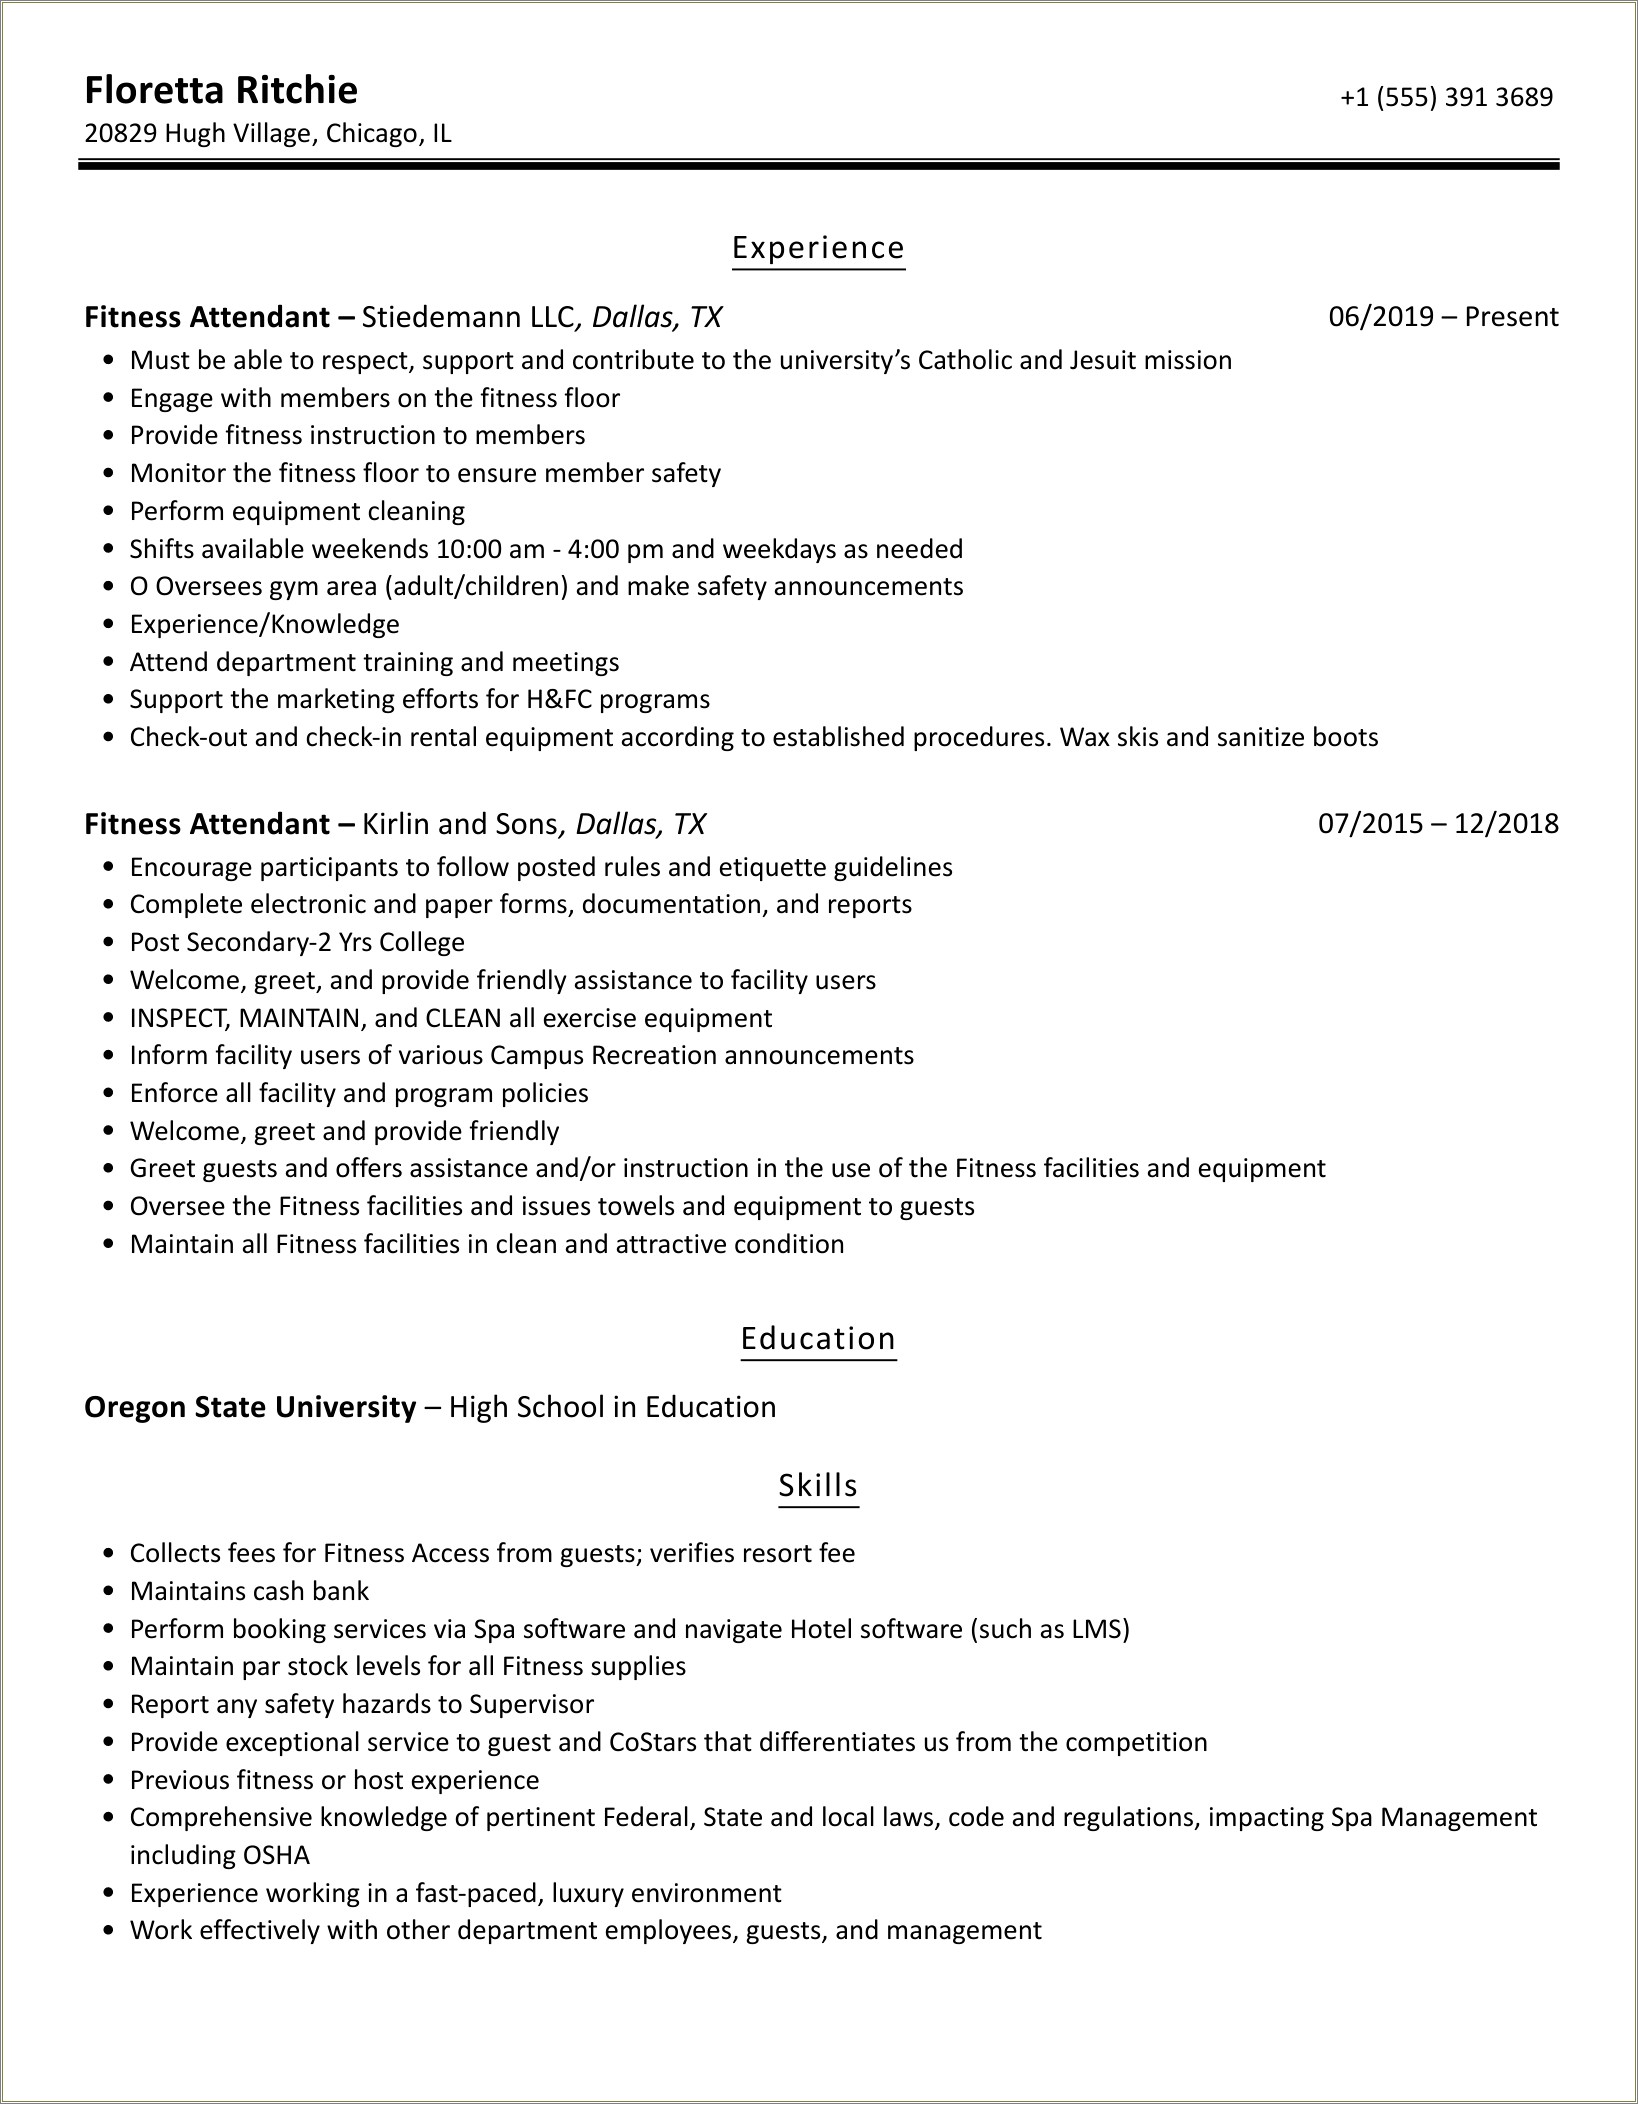 Resume For Working In A Gym